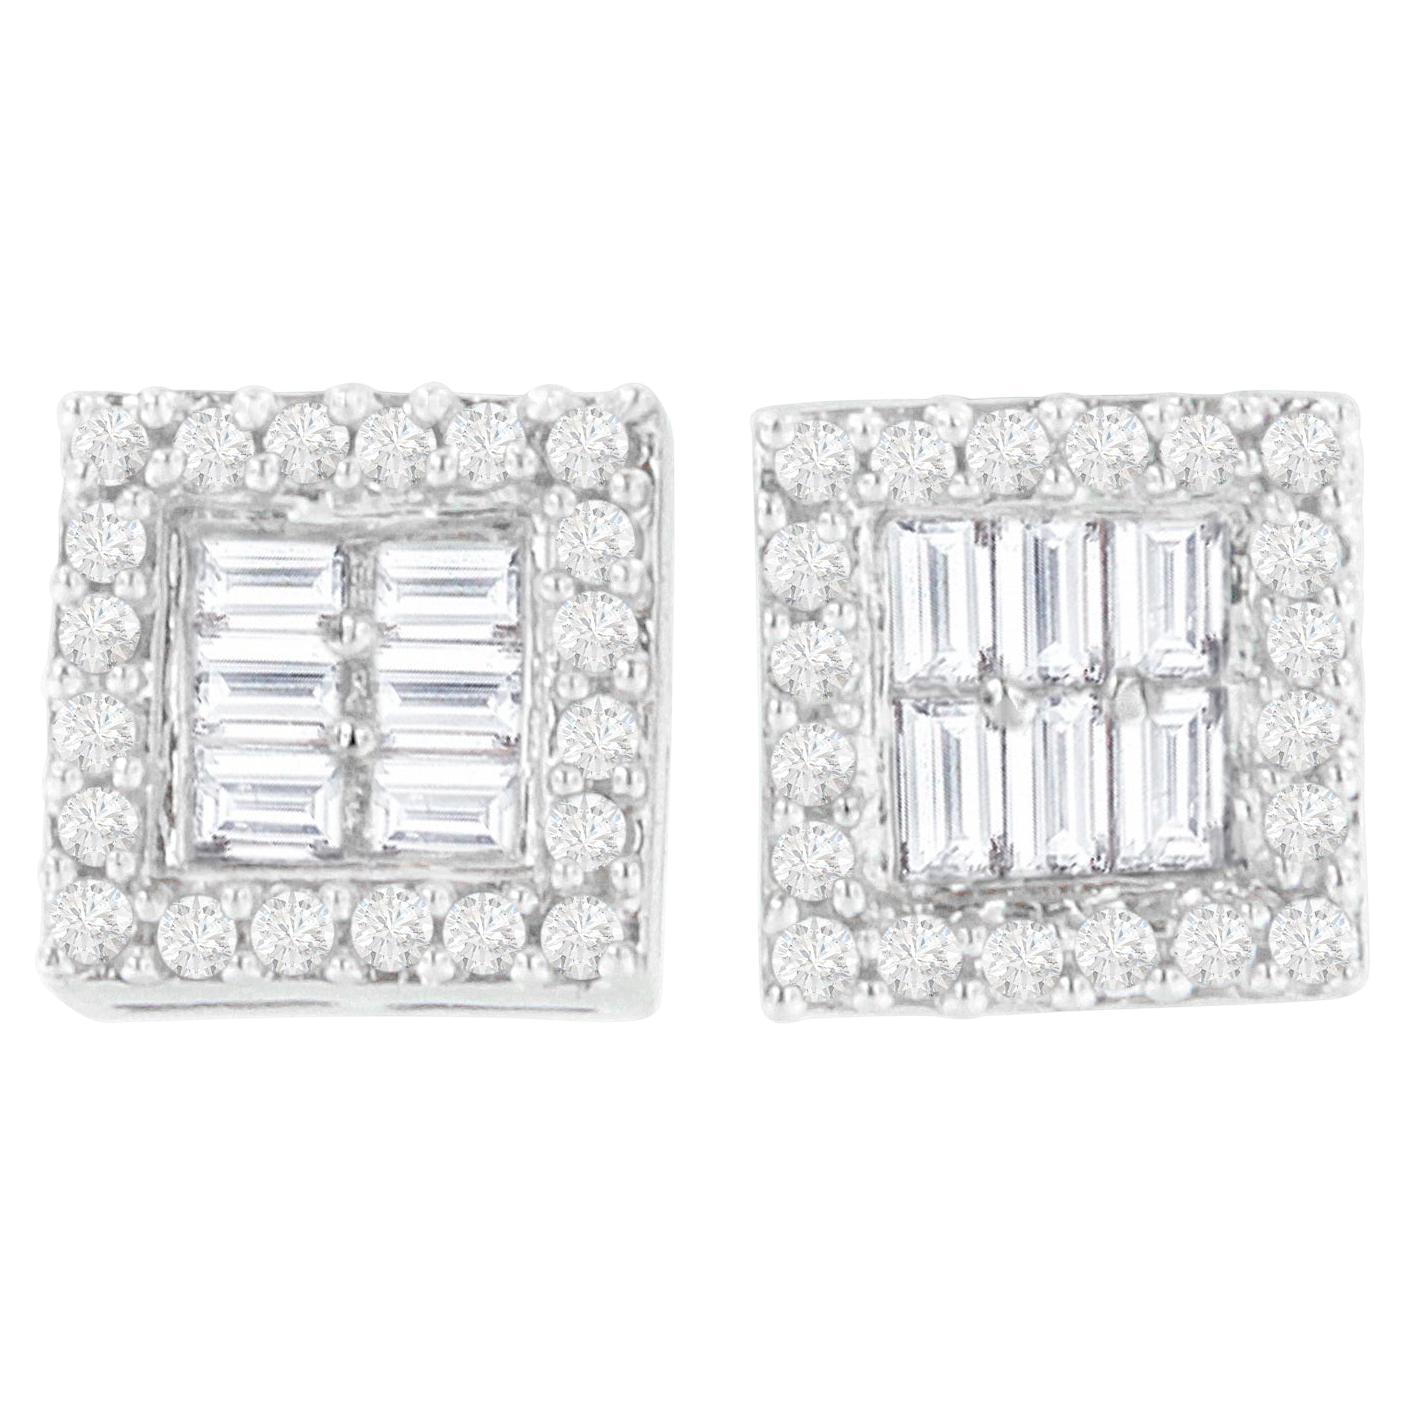 14K White Gold 1.0 Carat Round and Baguette Diamond Stud Earrings